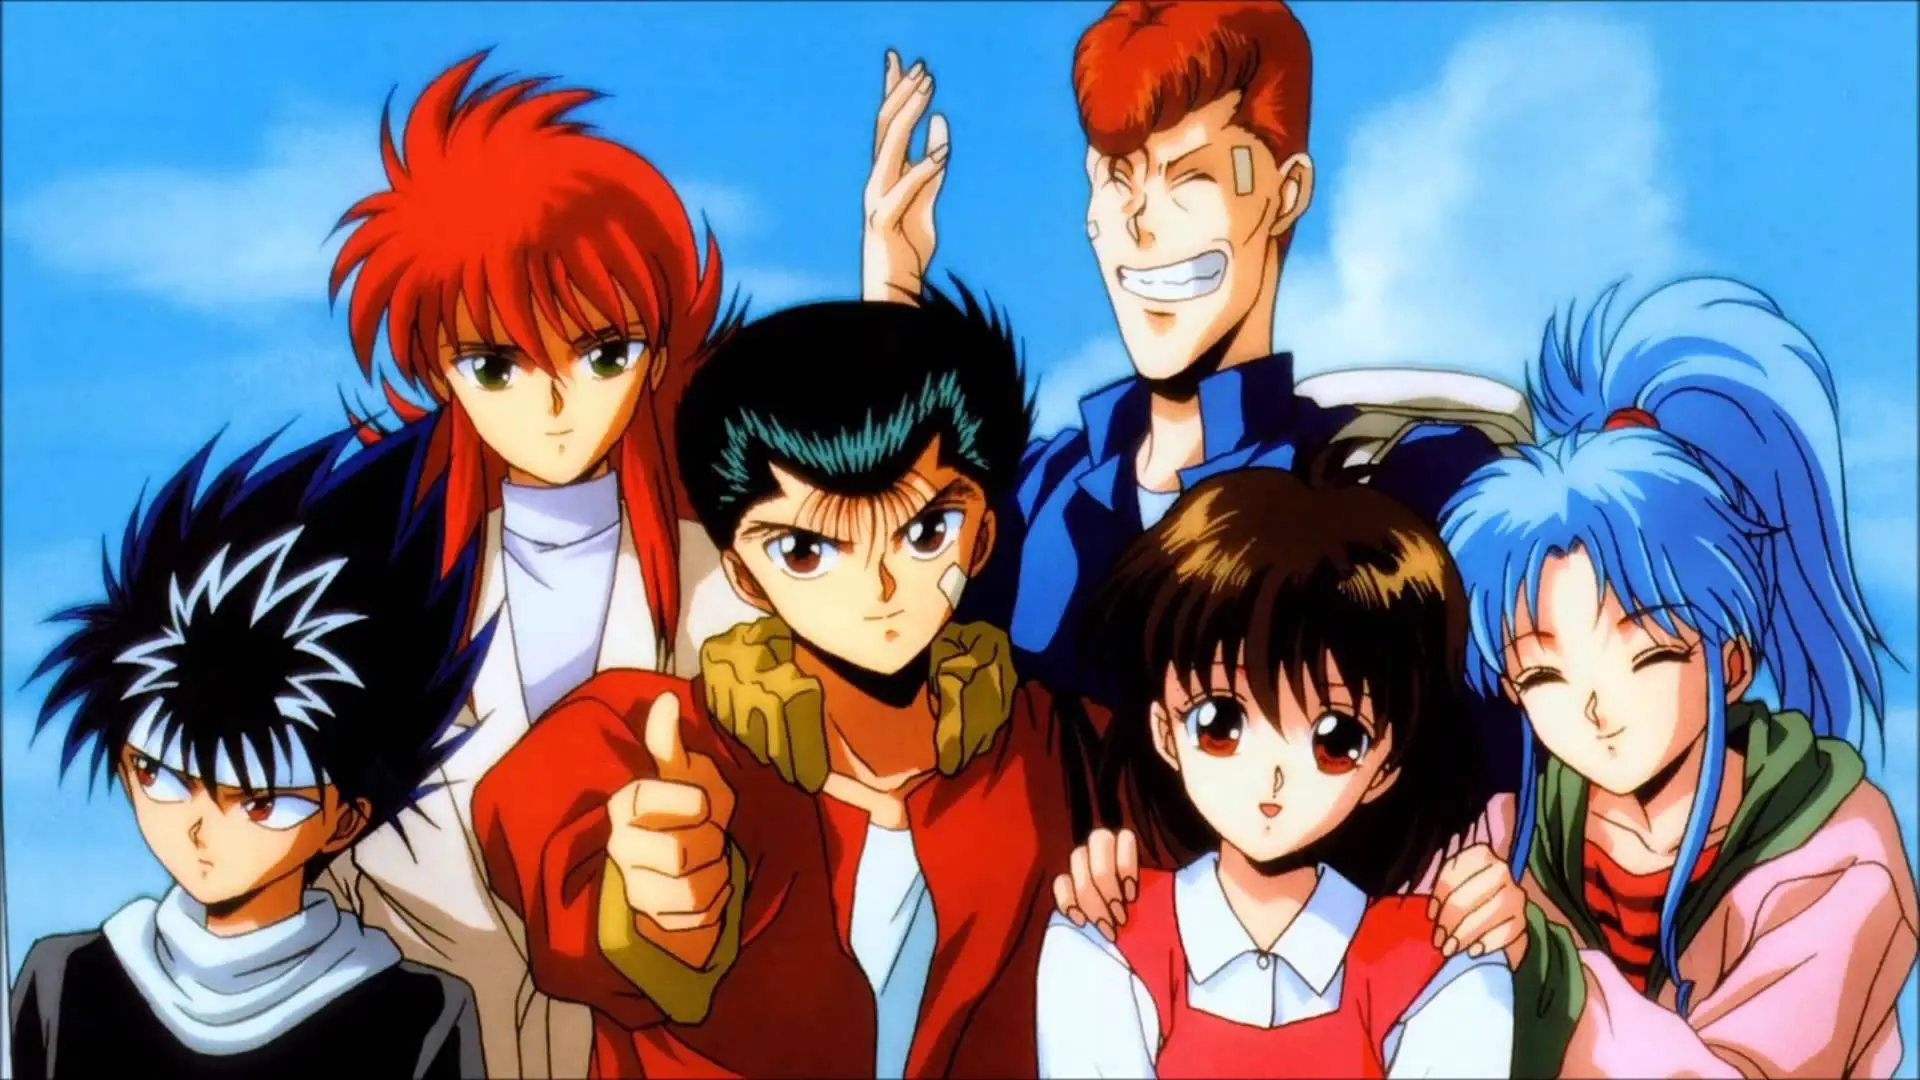 You are currently viewing 2023: The Year to Dive into the Thrilling World of Yu Yu Hakusho – Your Next Anime Must-Watch